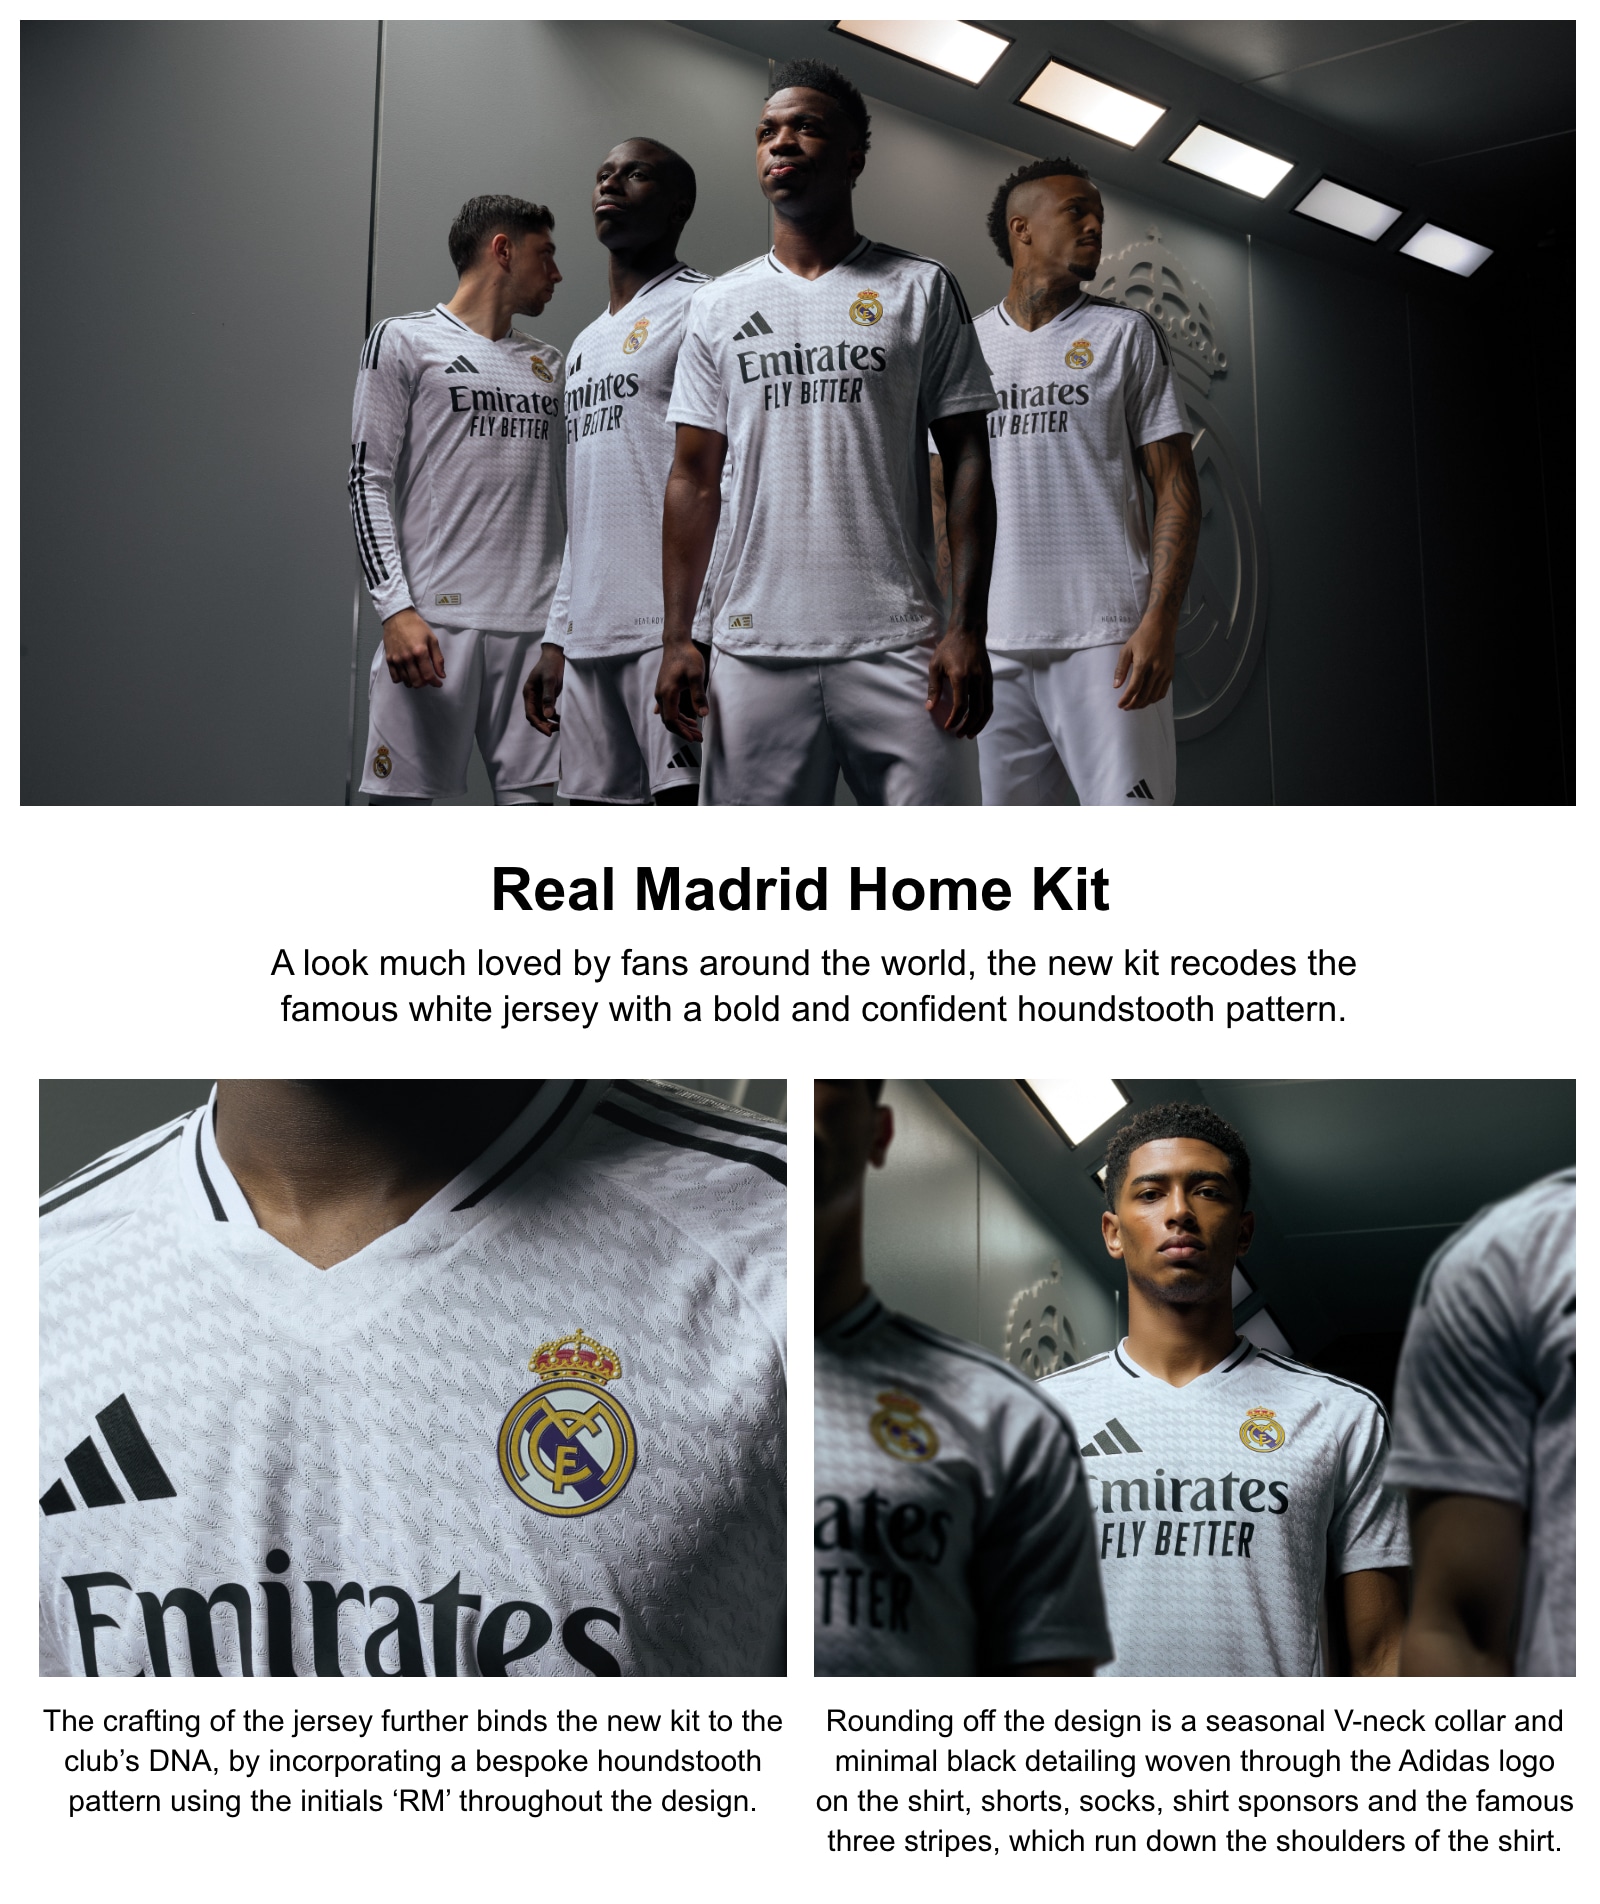 Real Madrid Home Kit. A look much loved by fans around the world, the new kit recode the famous white jersey with a bold and confident houndstooth pattern. The crafting of the jersey further binds the new kit to the club's DNA, by incorporating a bespoke houndstooth pattern using the initital RM throughout the design. Round off the design is a seasonal V-neck collar and minimal black detailing woven through the adidas logo on the shirts, shorts, socks, shirt sponsors and the famous three stripes, which run down the shoulders of the shirts.